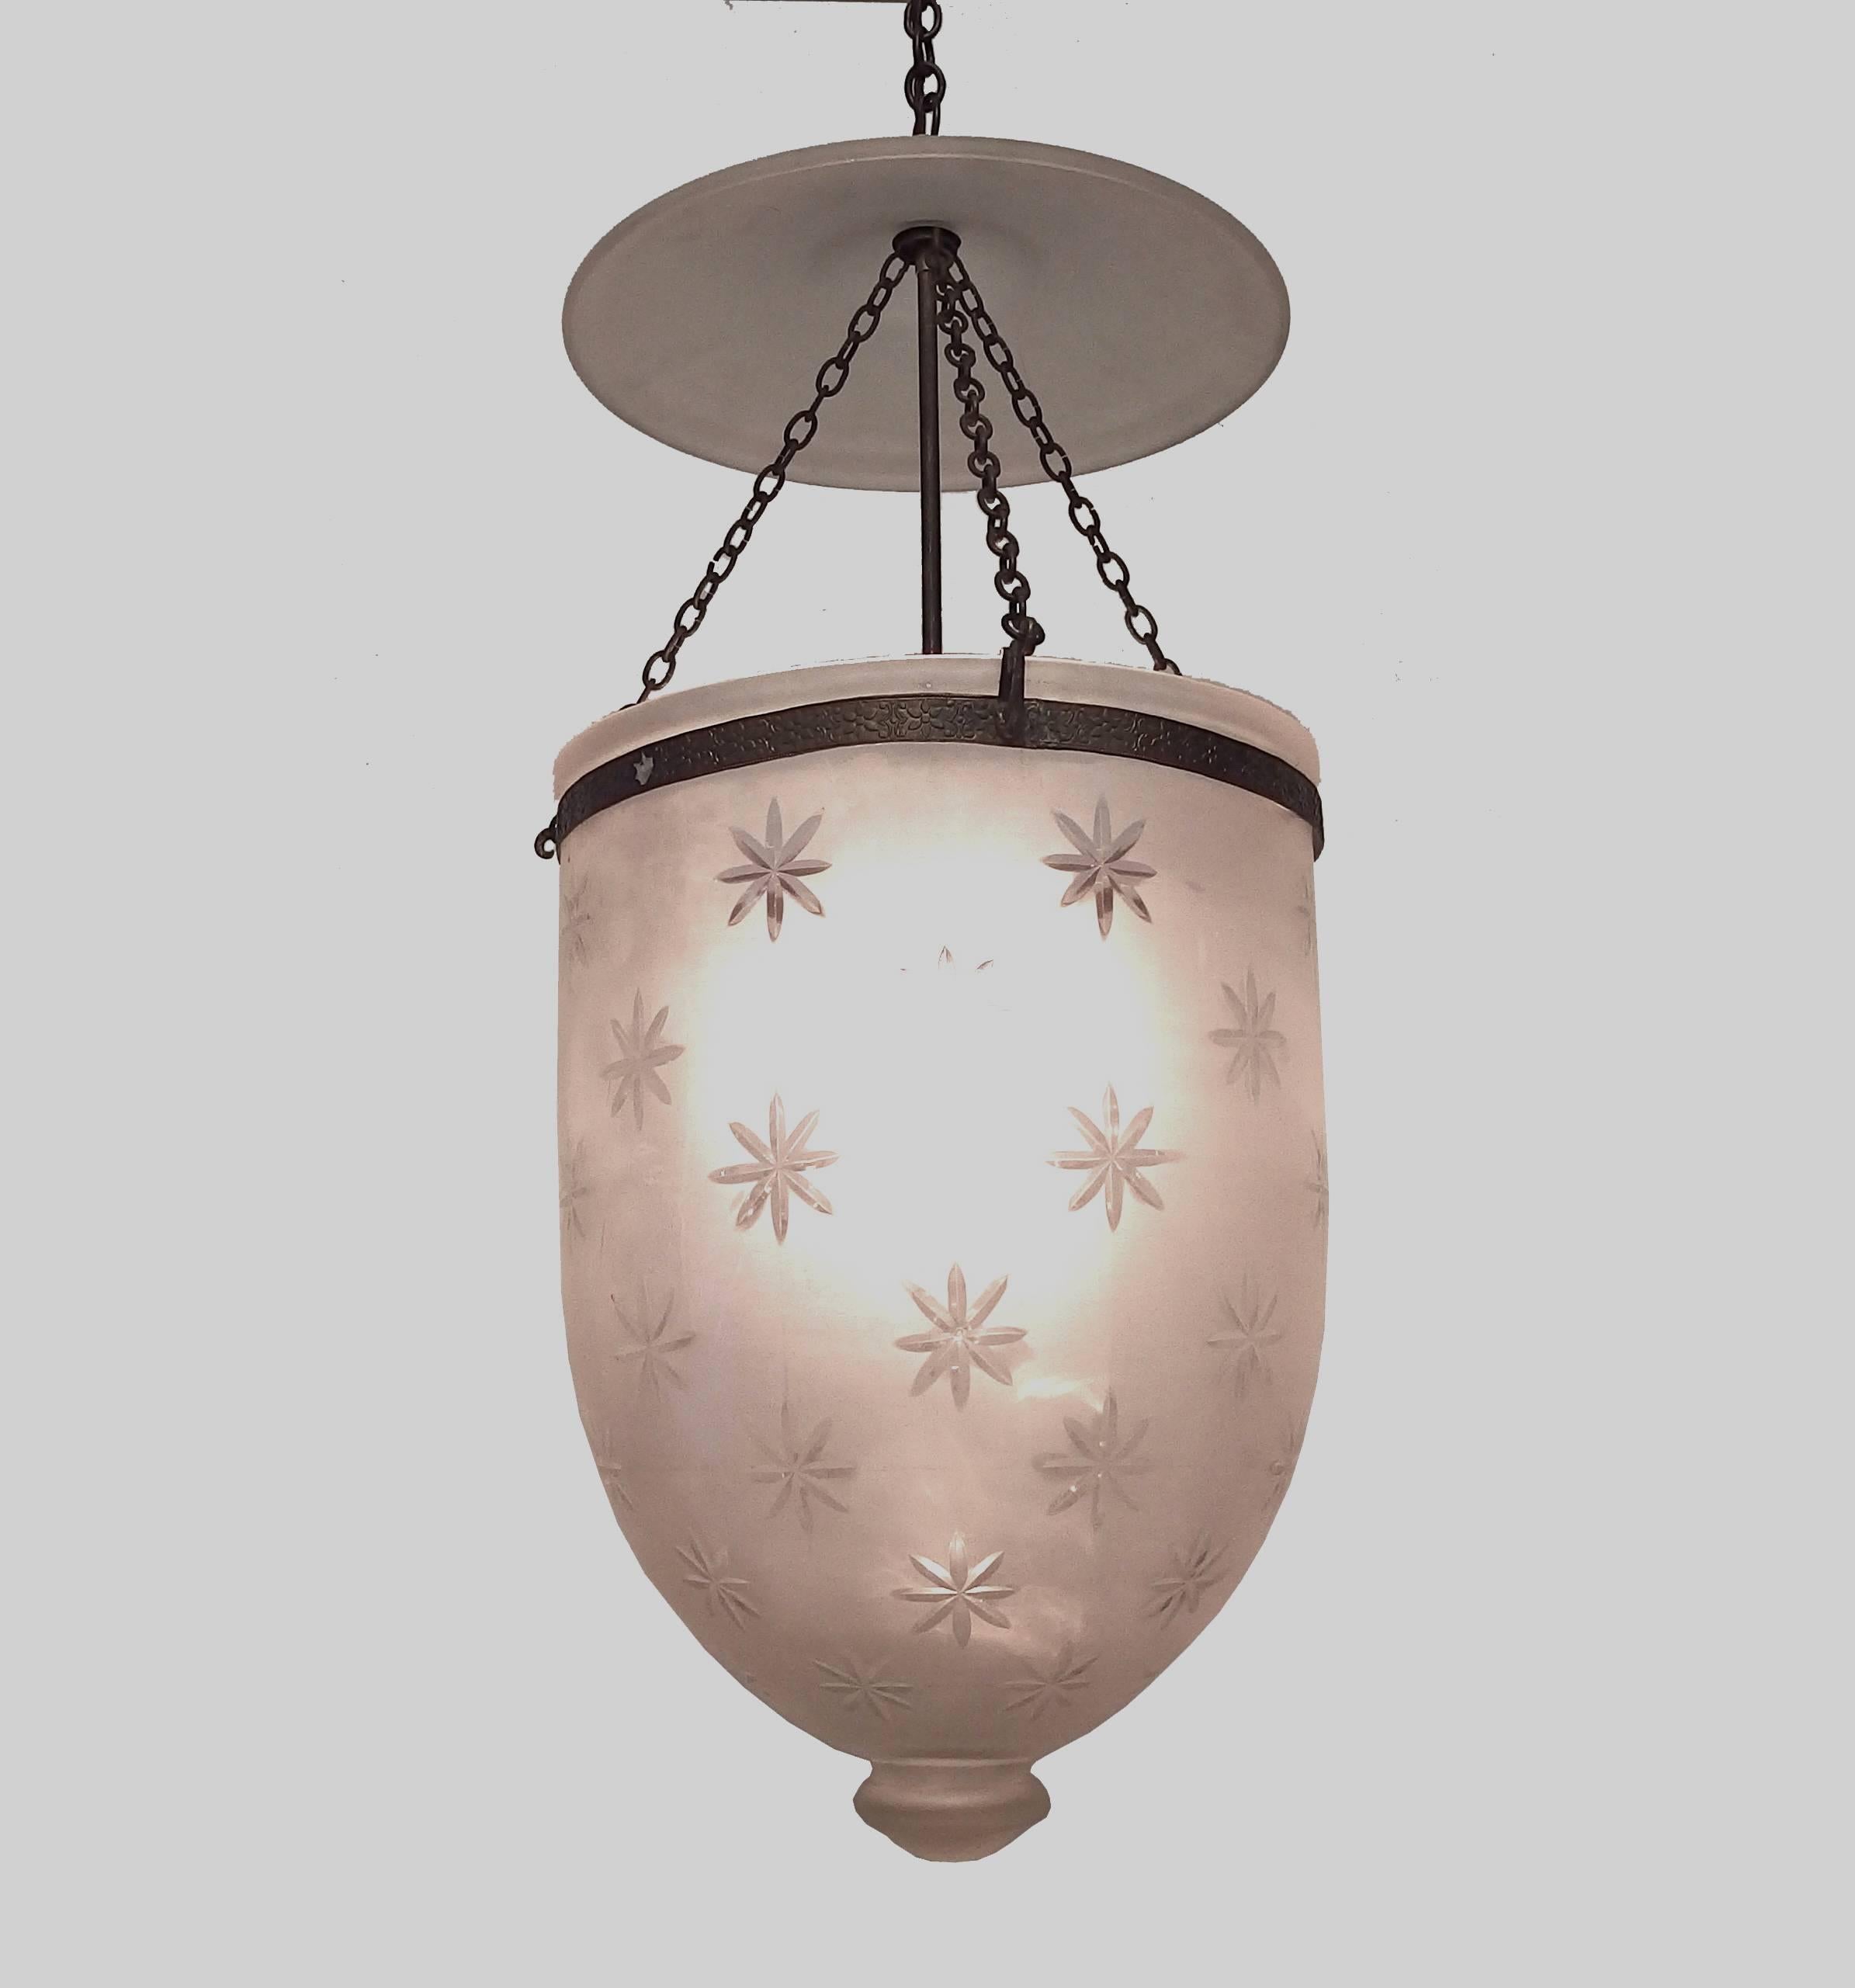 Beautiful French etched crystal bell lantern with clear stars. The frame and chains are in brass.